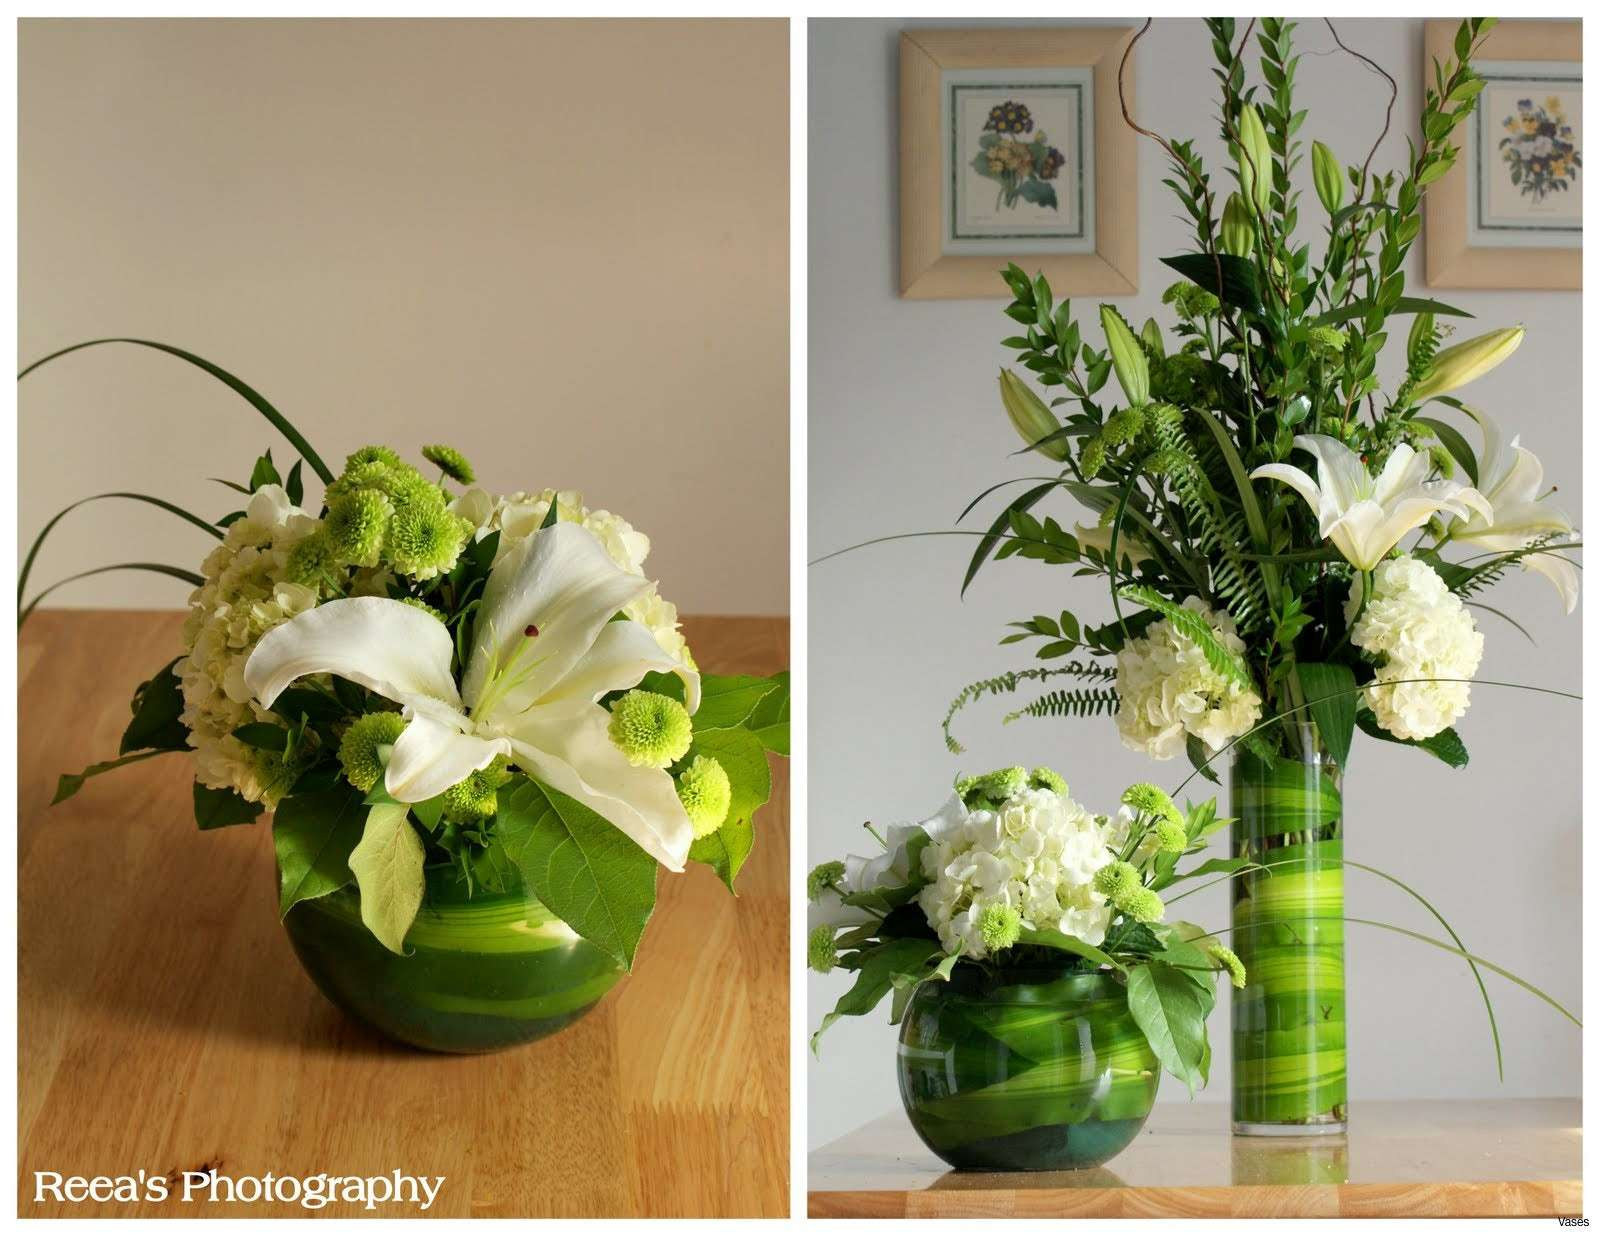 13 Attractive Tall Floor Vases With Artificial Flowers Decorative Vase Ideas